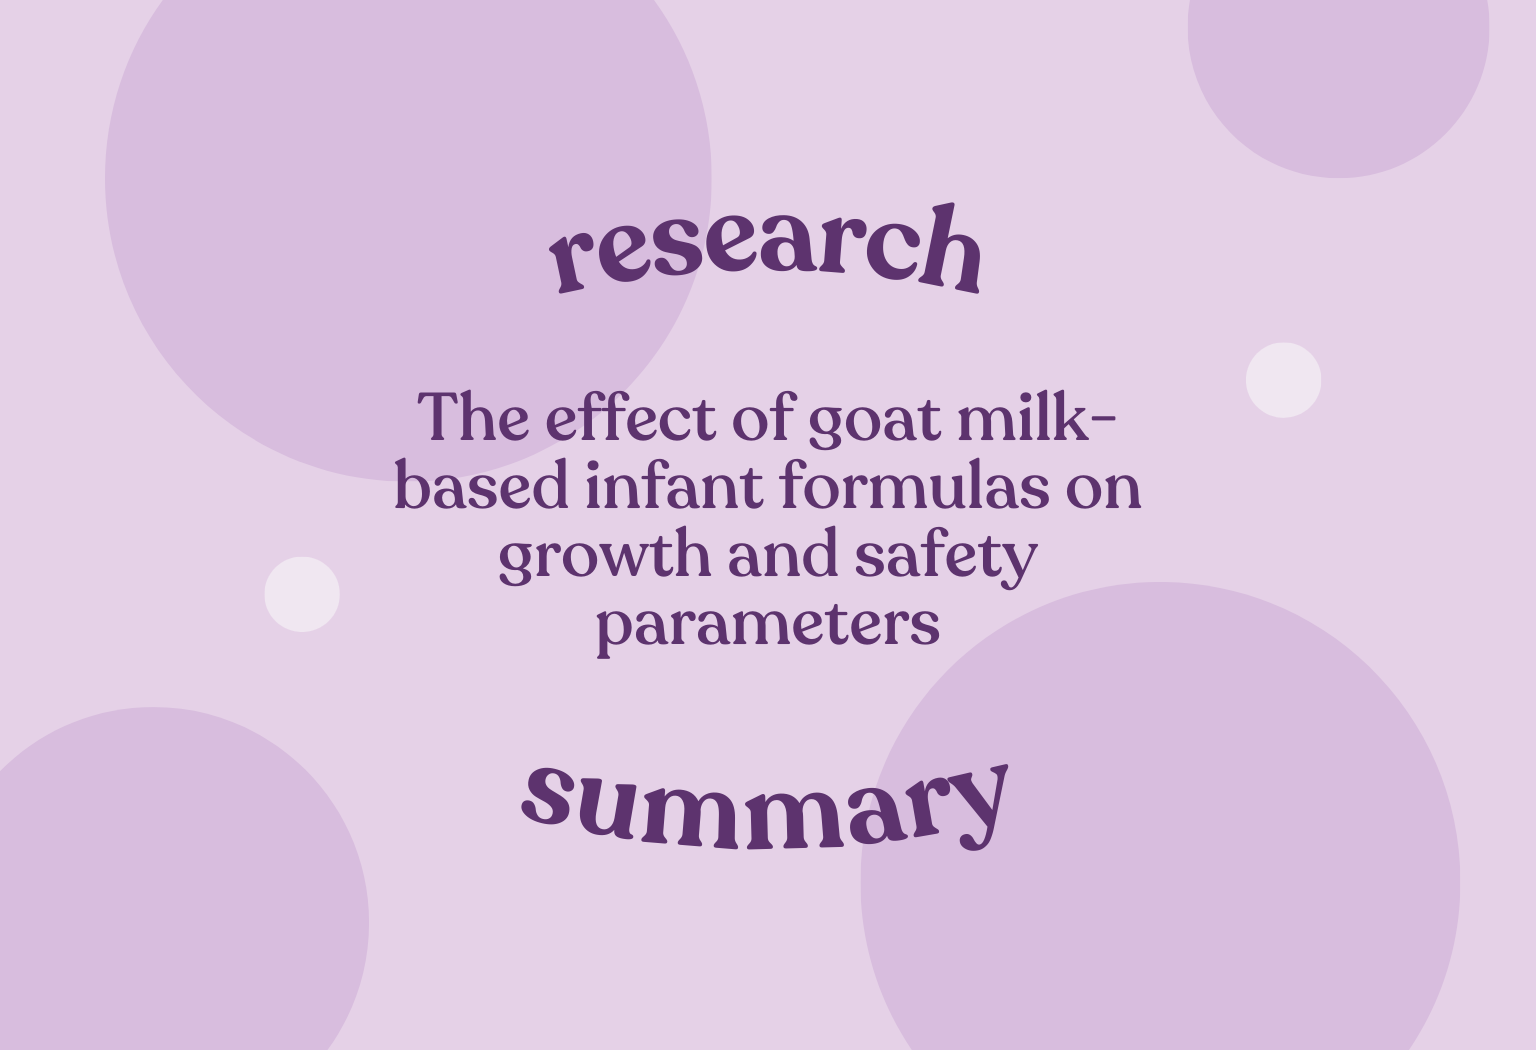 The effect of goat milk-based infant formulas on growth and safety parameters